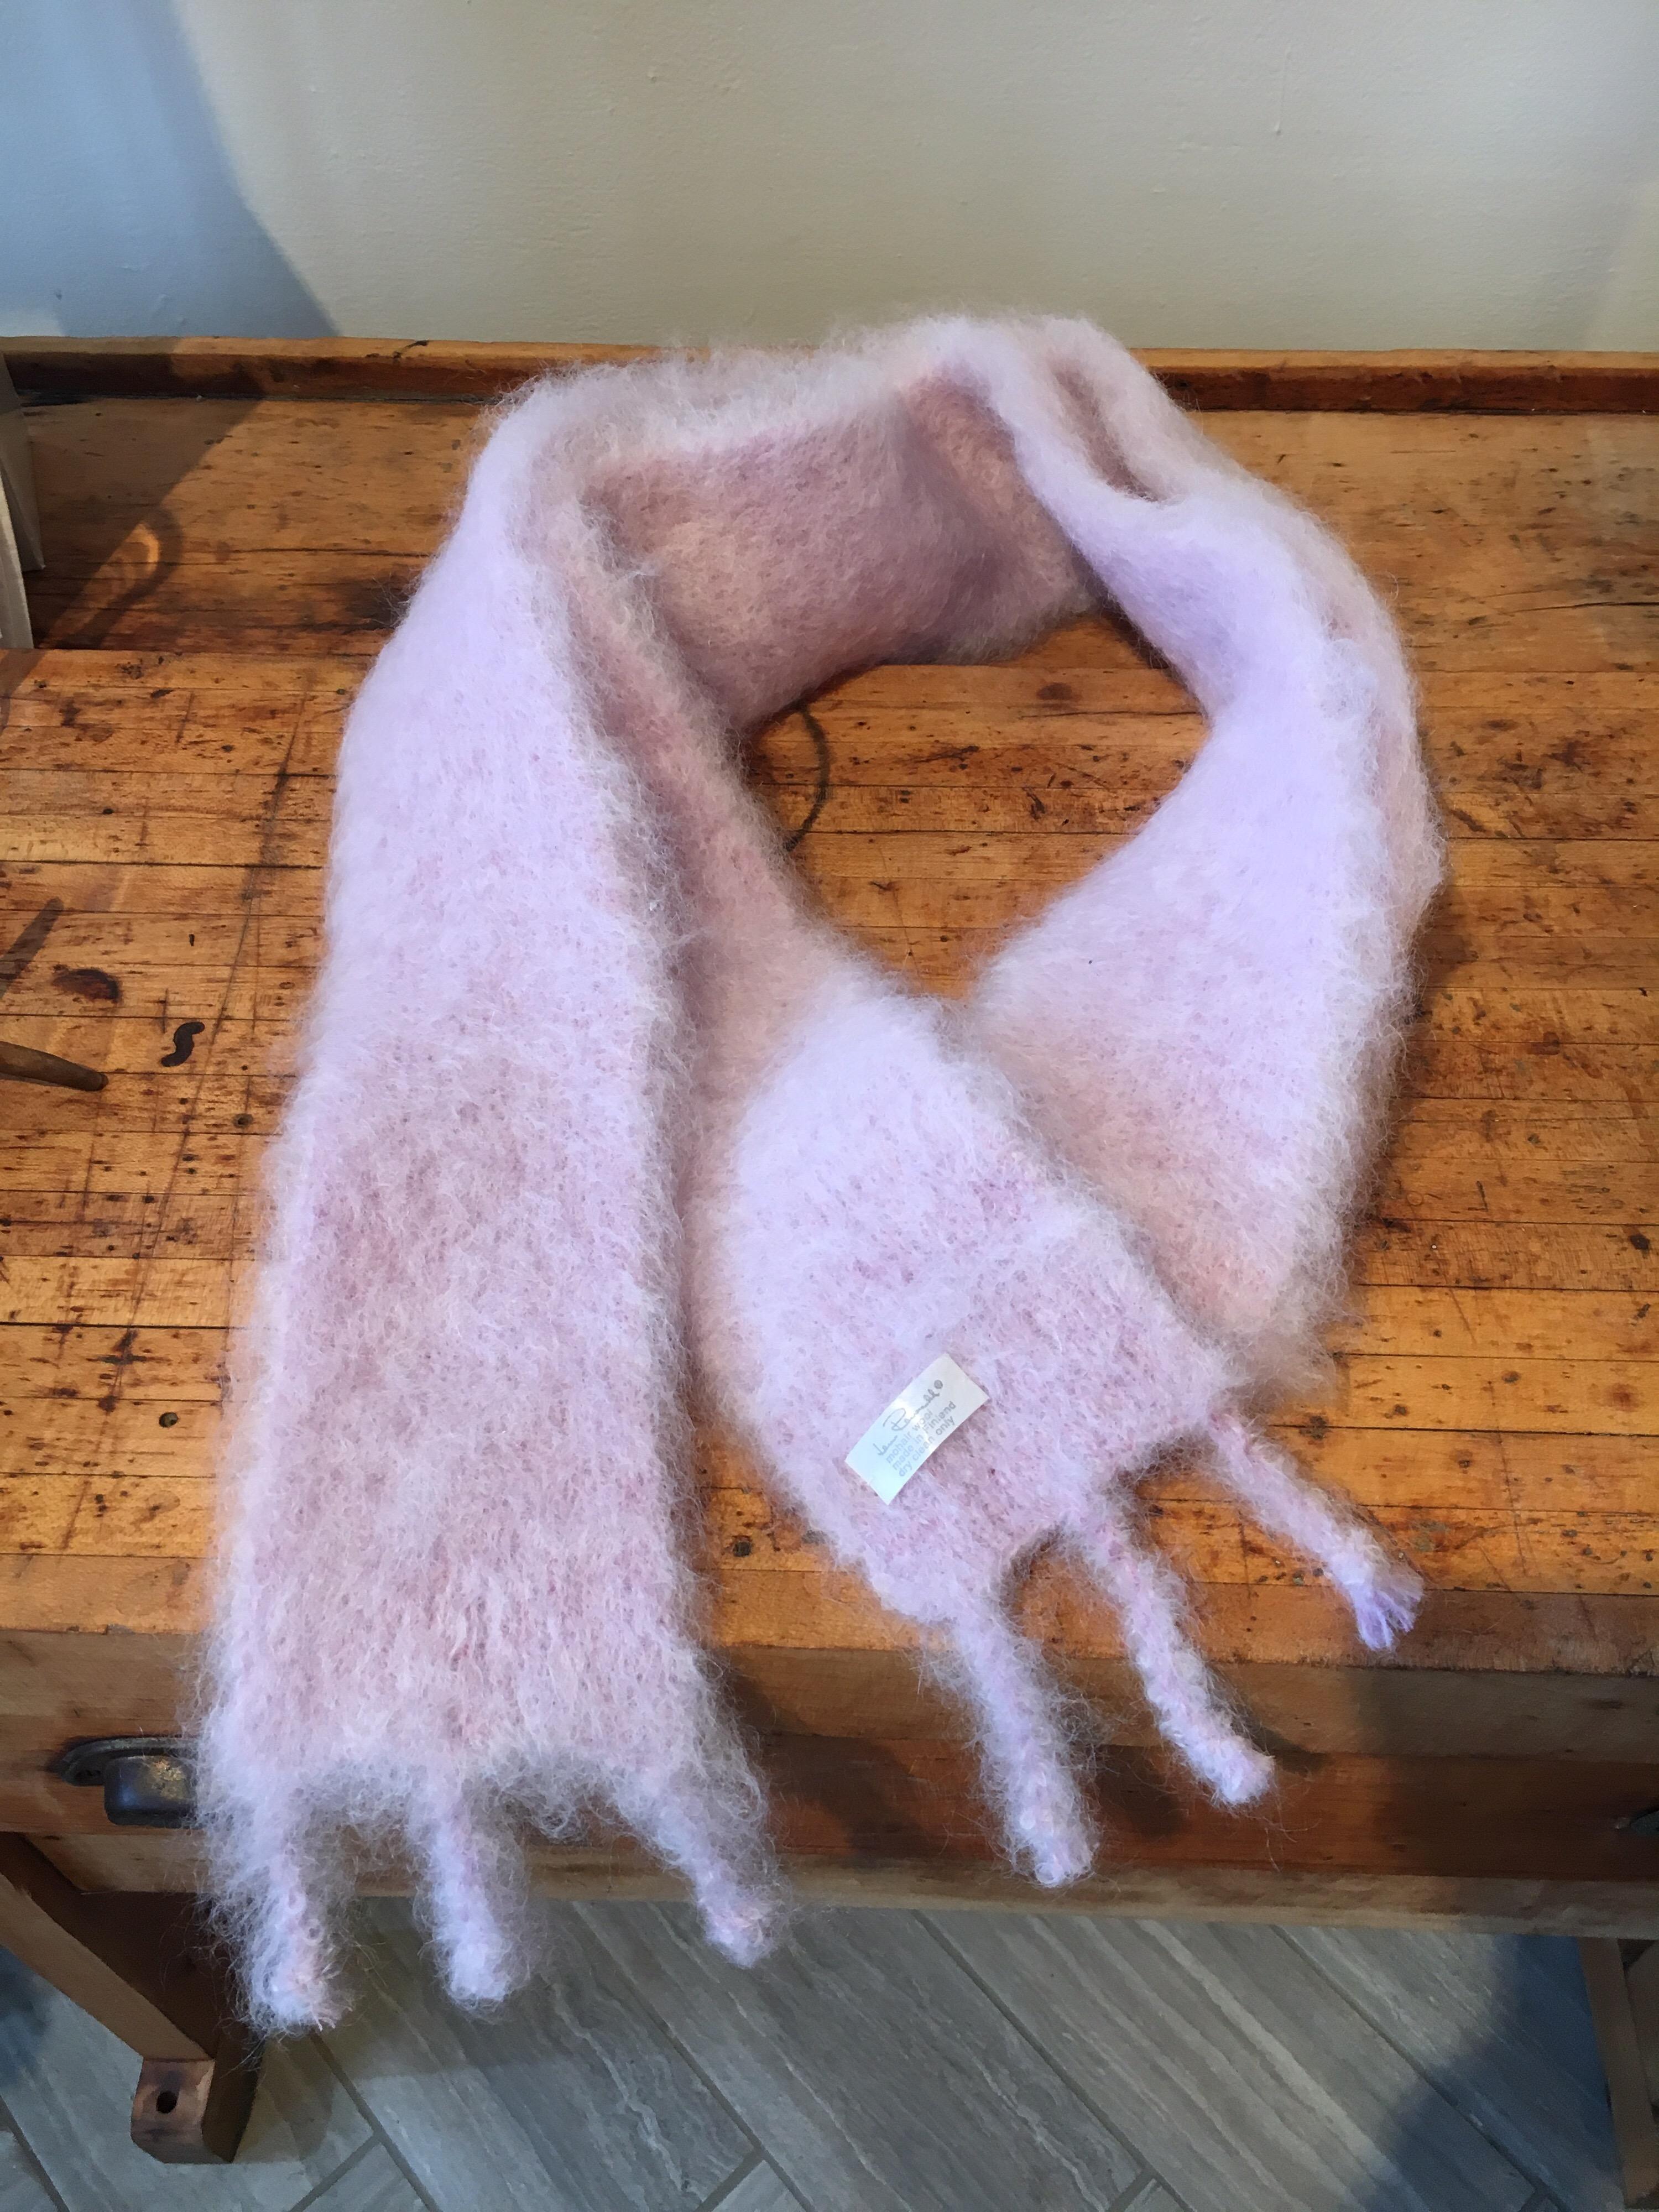 Chic handwoven mohair scarf by Lena Rewell of Finland. This model is called the 'Fox' scarf, as it calls to mind the glamorous fox scarves of the early 20th century (please note there is no fur, this is a mohair scarf). The unusually narrow and long